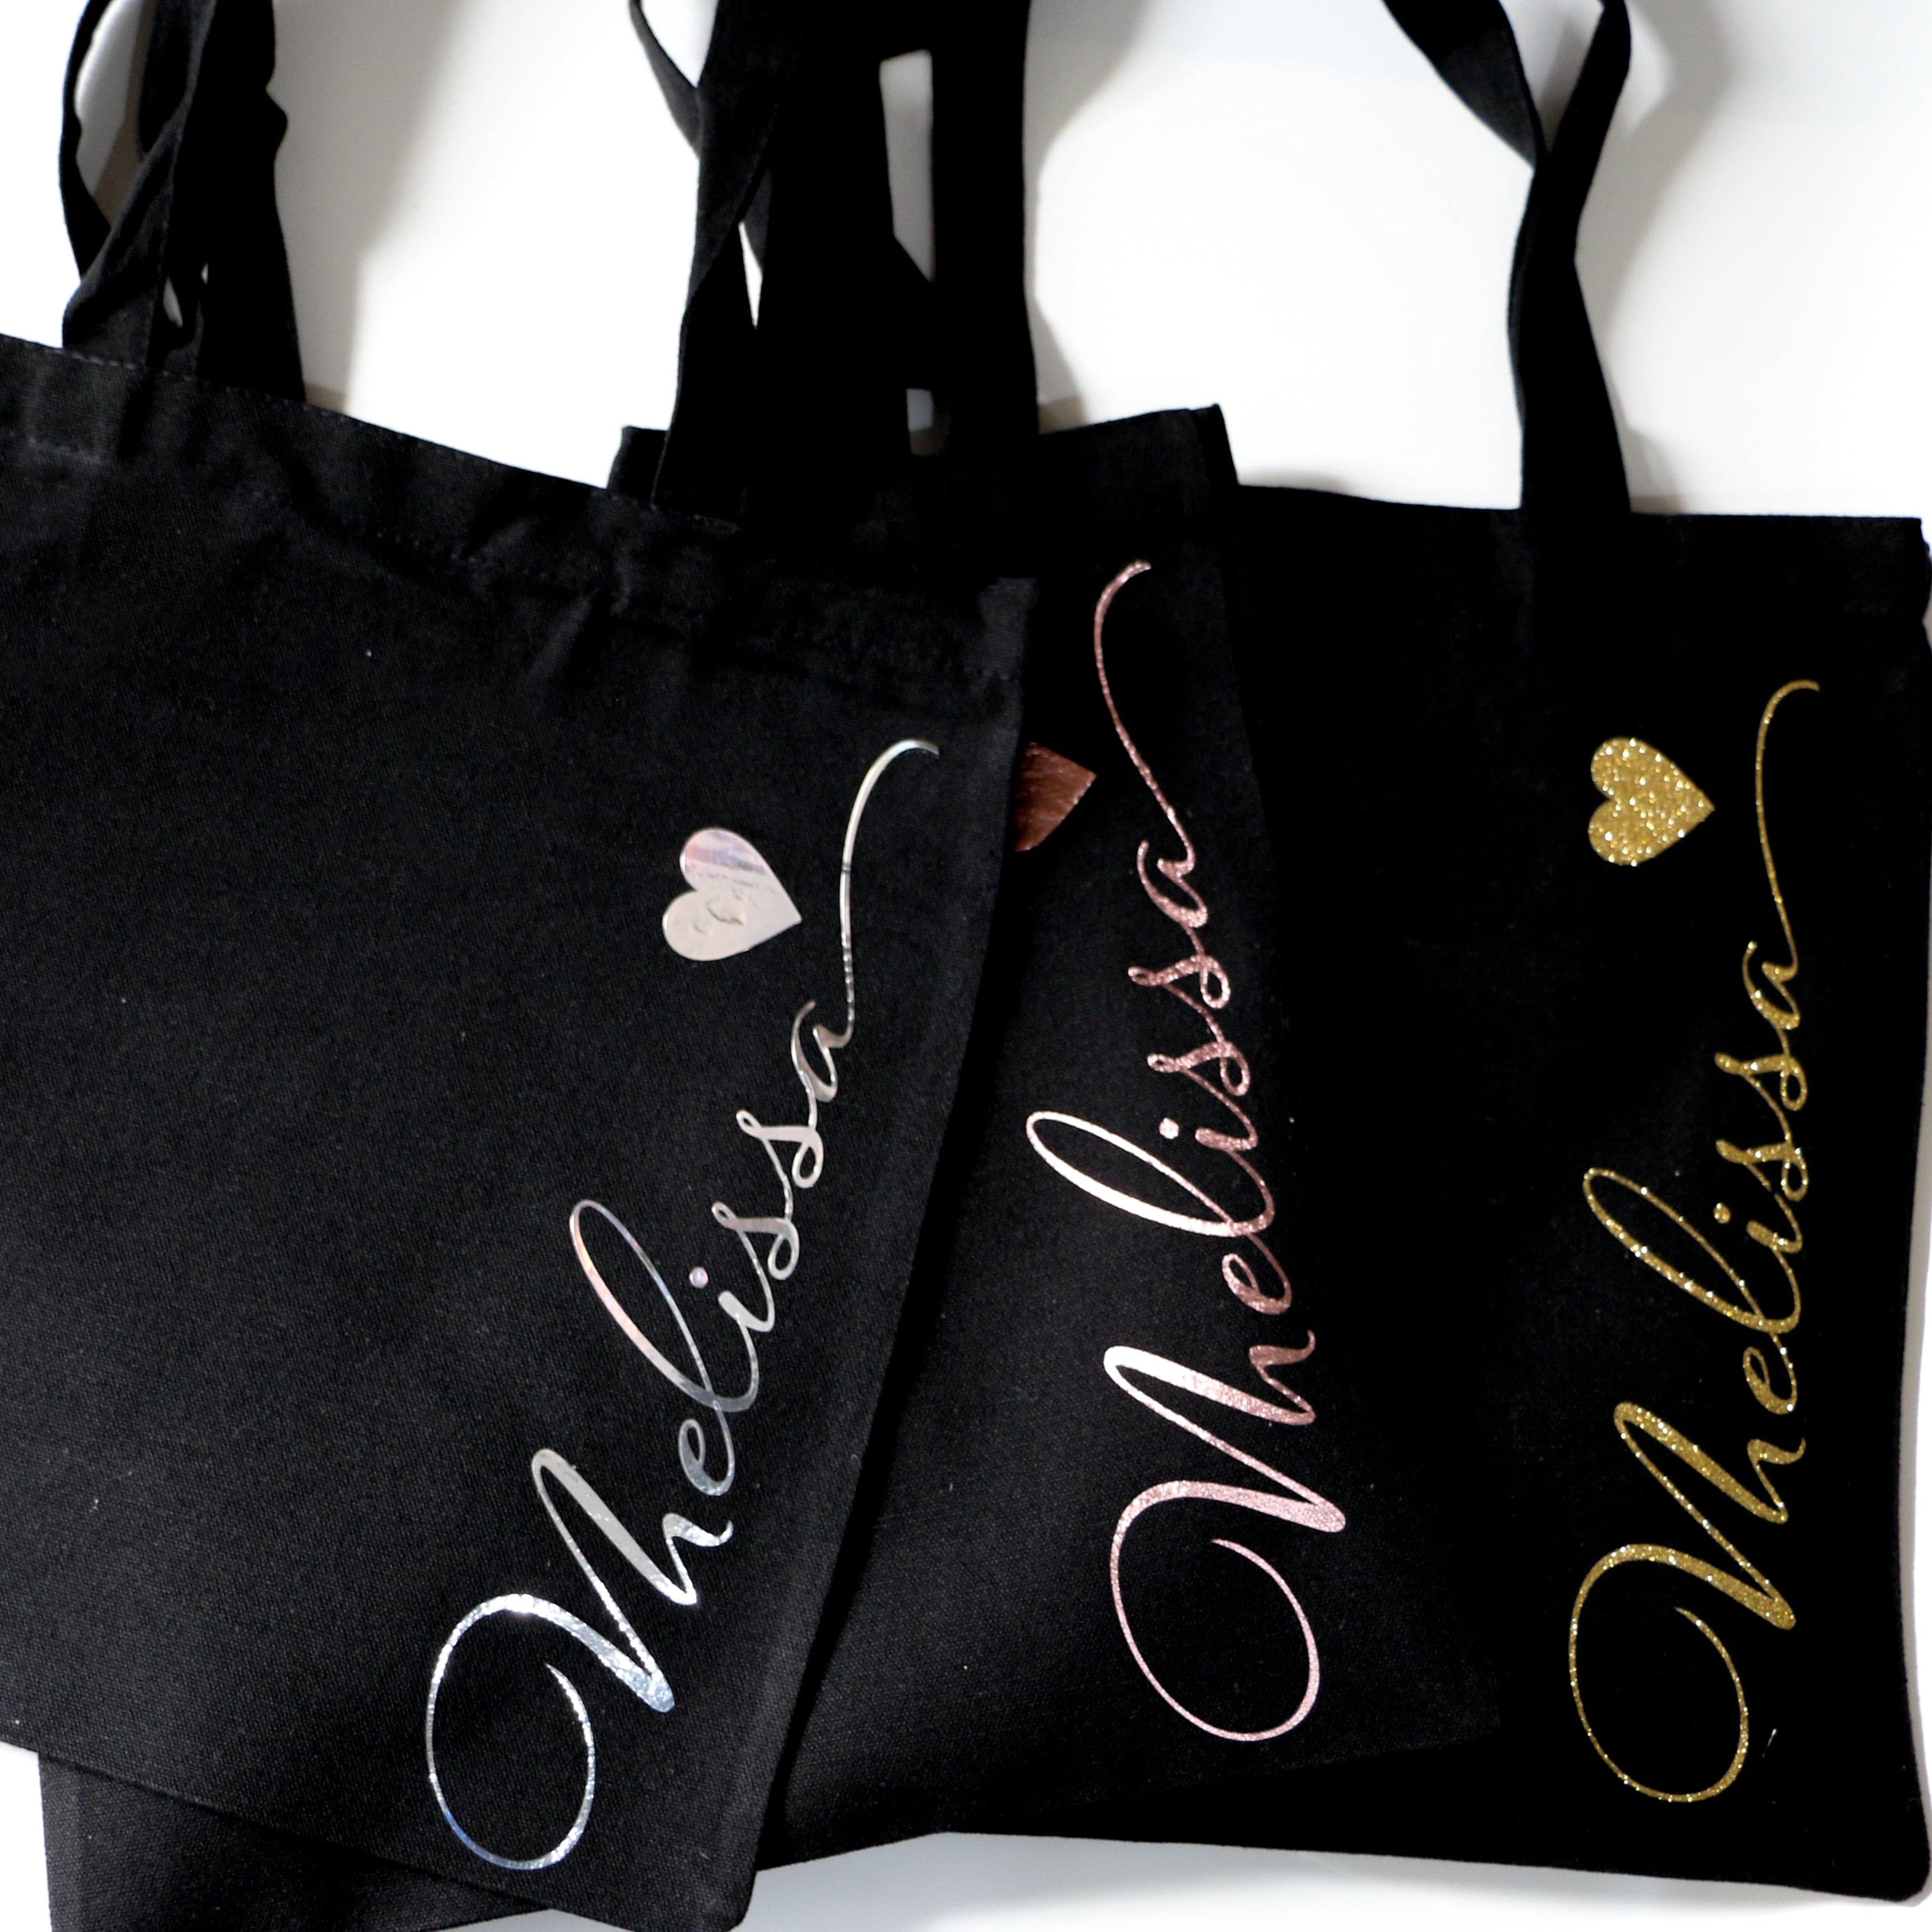 customized tote bags with names